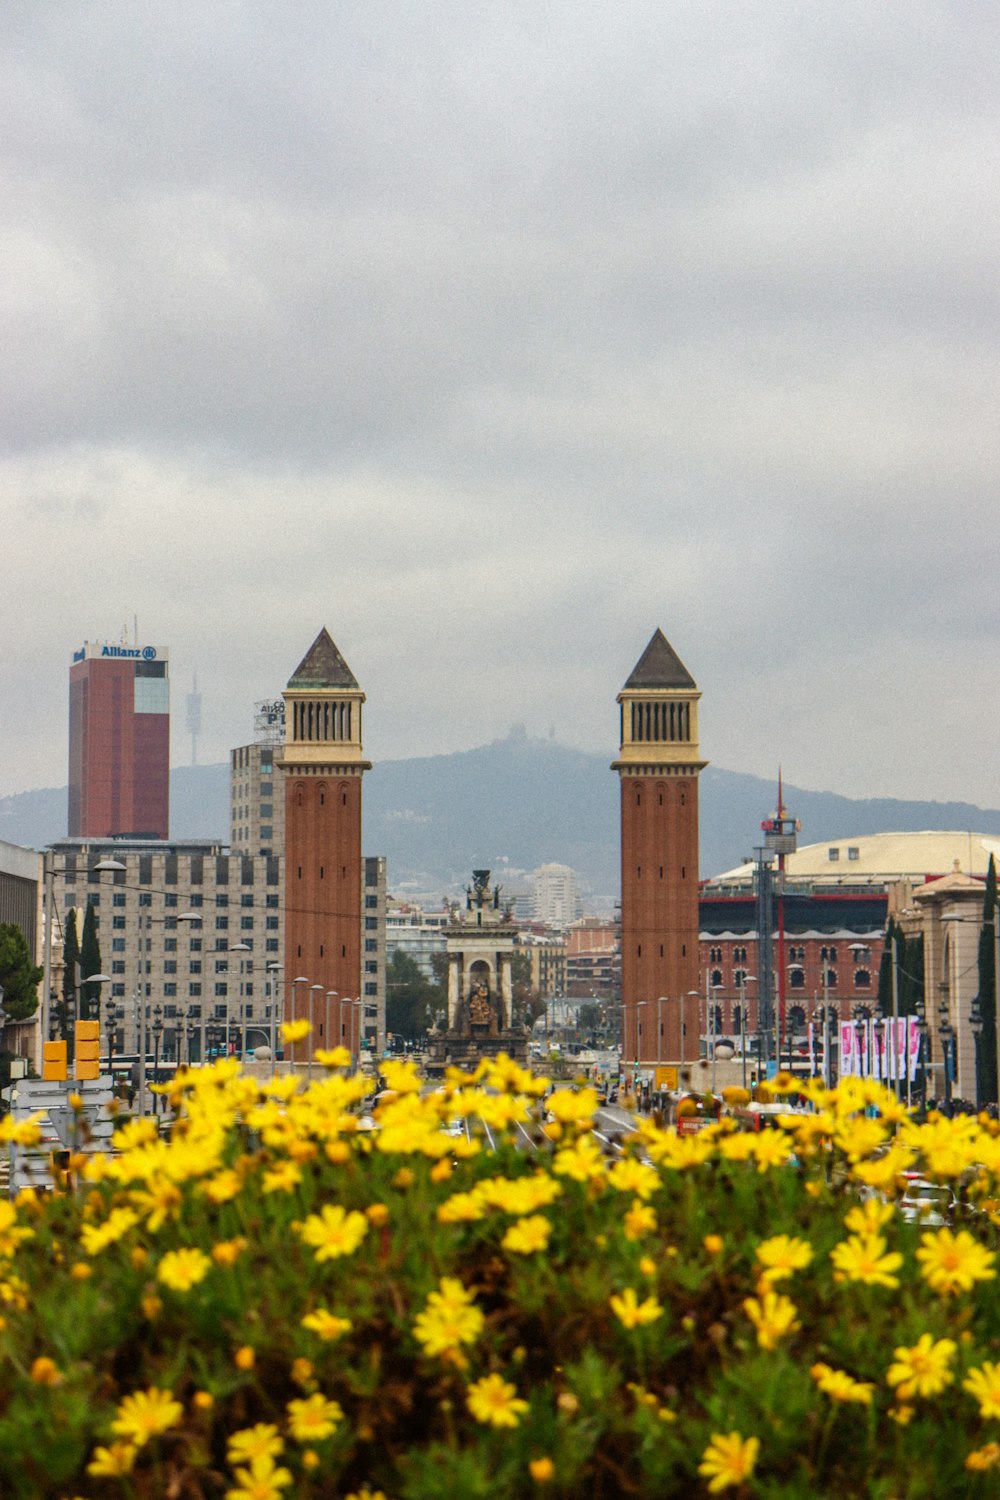 a view of a city with tall buildings and yellow flowers in the foreground